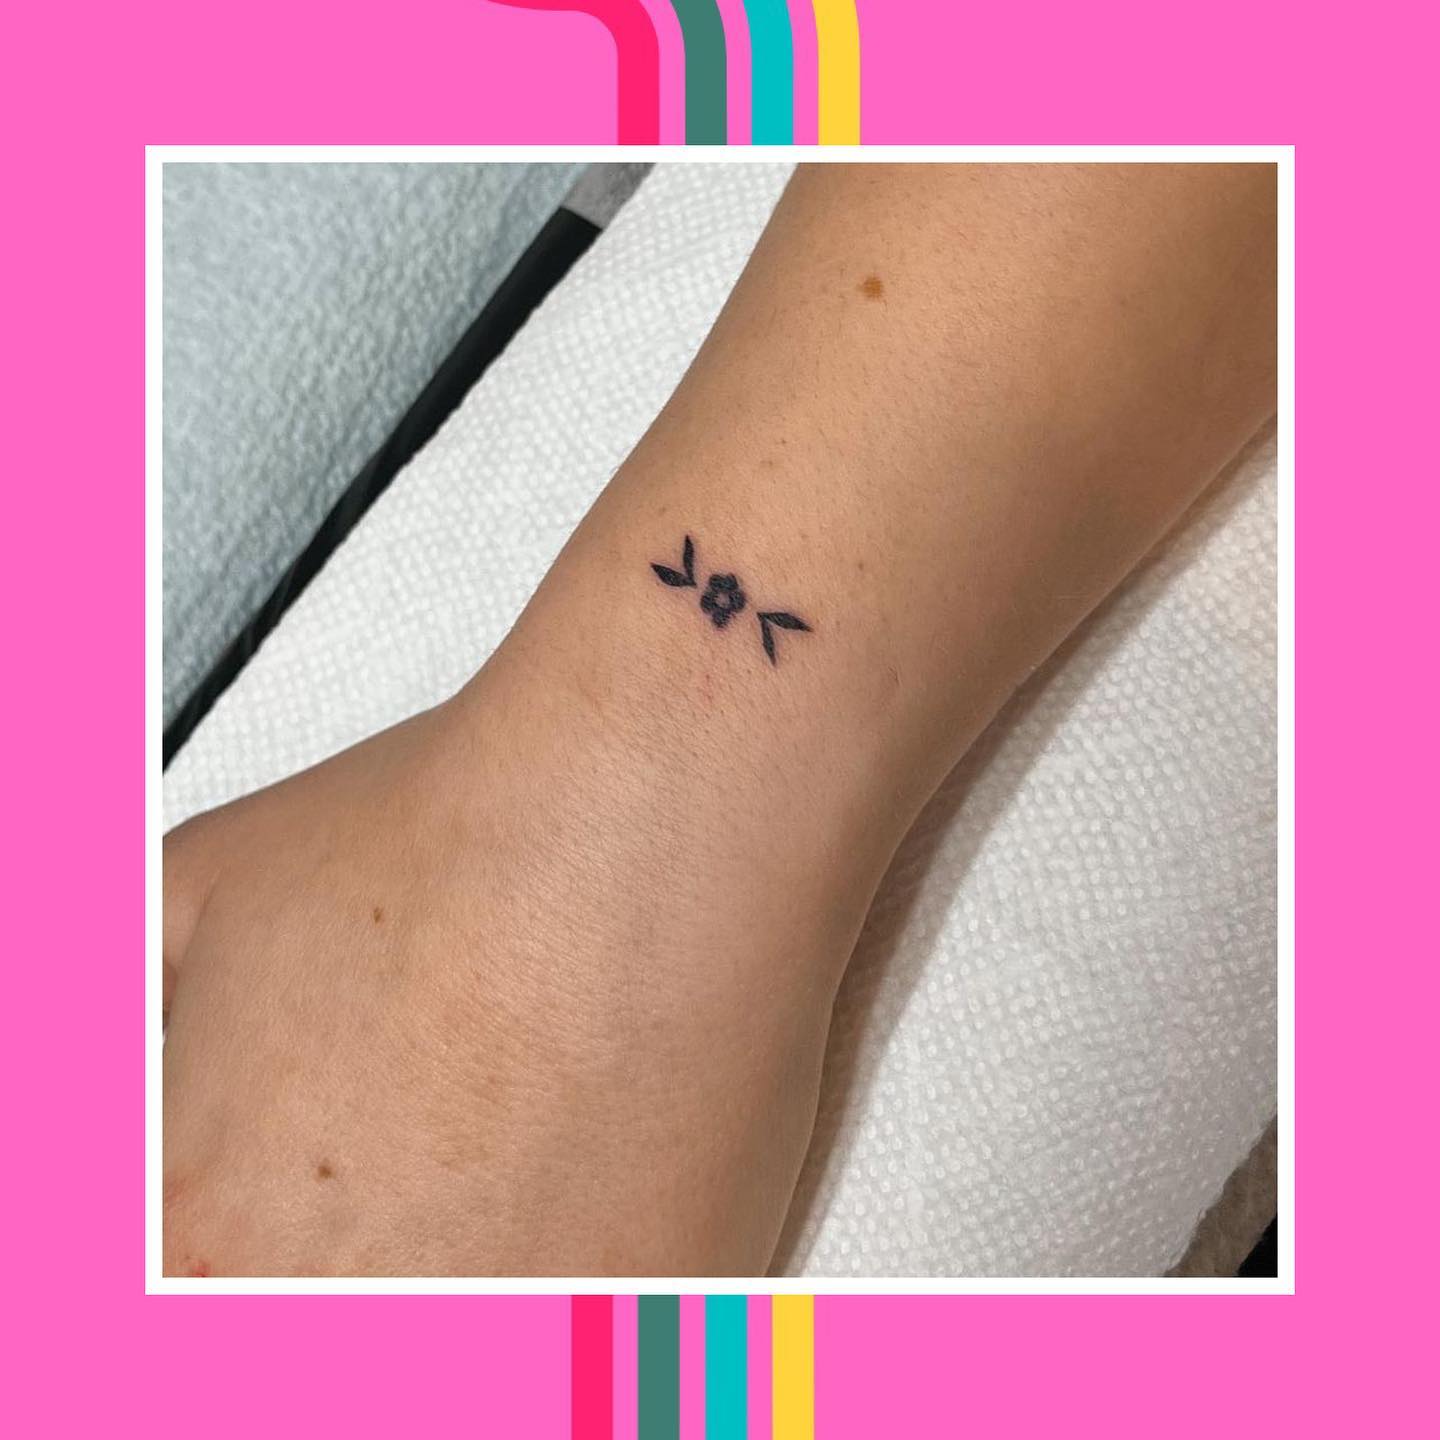 Teensy tiny tattoo by @charlie.labz Link in bio to book.